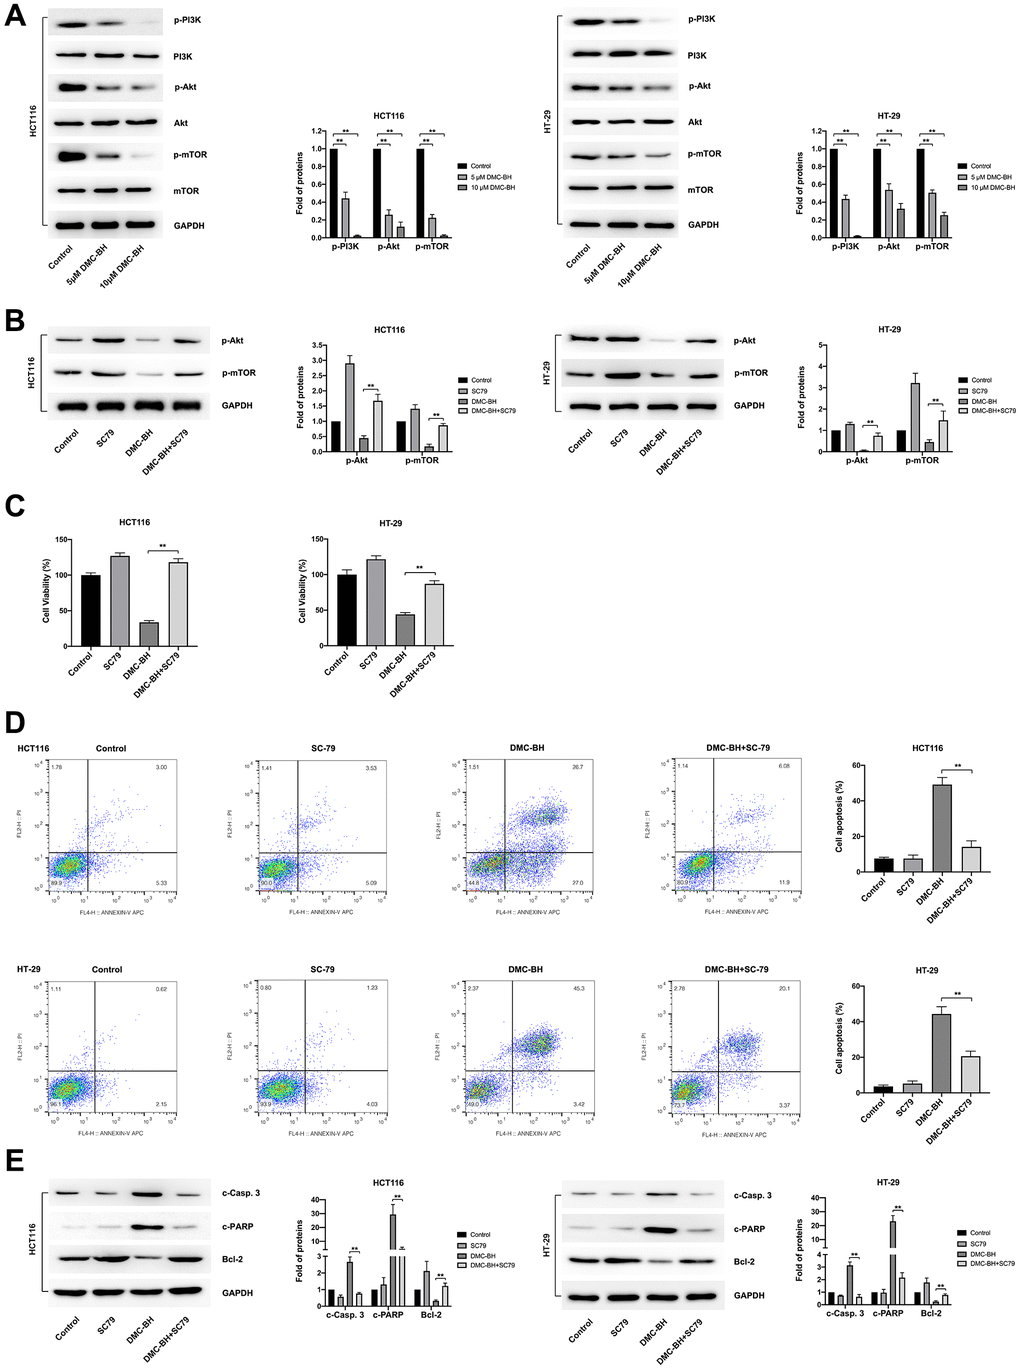 DMC-BH inhibits PI3K-Akt signaling in CRC cells. (A) Western blot analysis of phosphorylated levels of p-PI3K, p-Akt, and p-mTOR after DMC-BH treatment. (B) The phosphorylated levels of p-Akt and p-mTOR measured after incubation with the Akt pathway activator SC79 (10.96 μM). (C) Cell viability analysis of CRC cells treated with DMC-BH and SC79 in combination. (D) Flow cytometry analysis of CRC cells treated with DMC-BH and SC79 in combination. (E) Western blot analysis of the relevant apoptotic proteins (Bcl-2 and c-Casp. 3 and c-PARP) after DMC-BH and SC79 combined treatment.